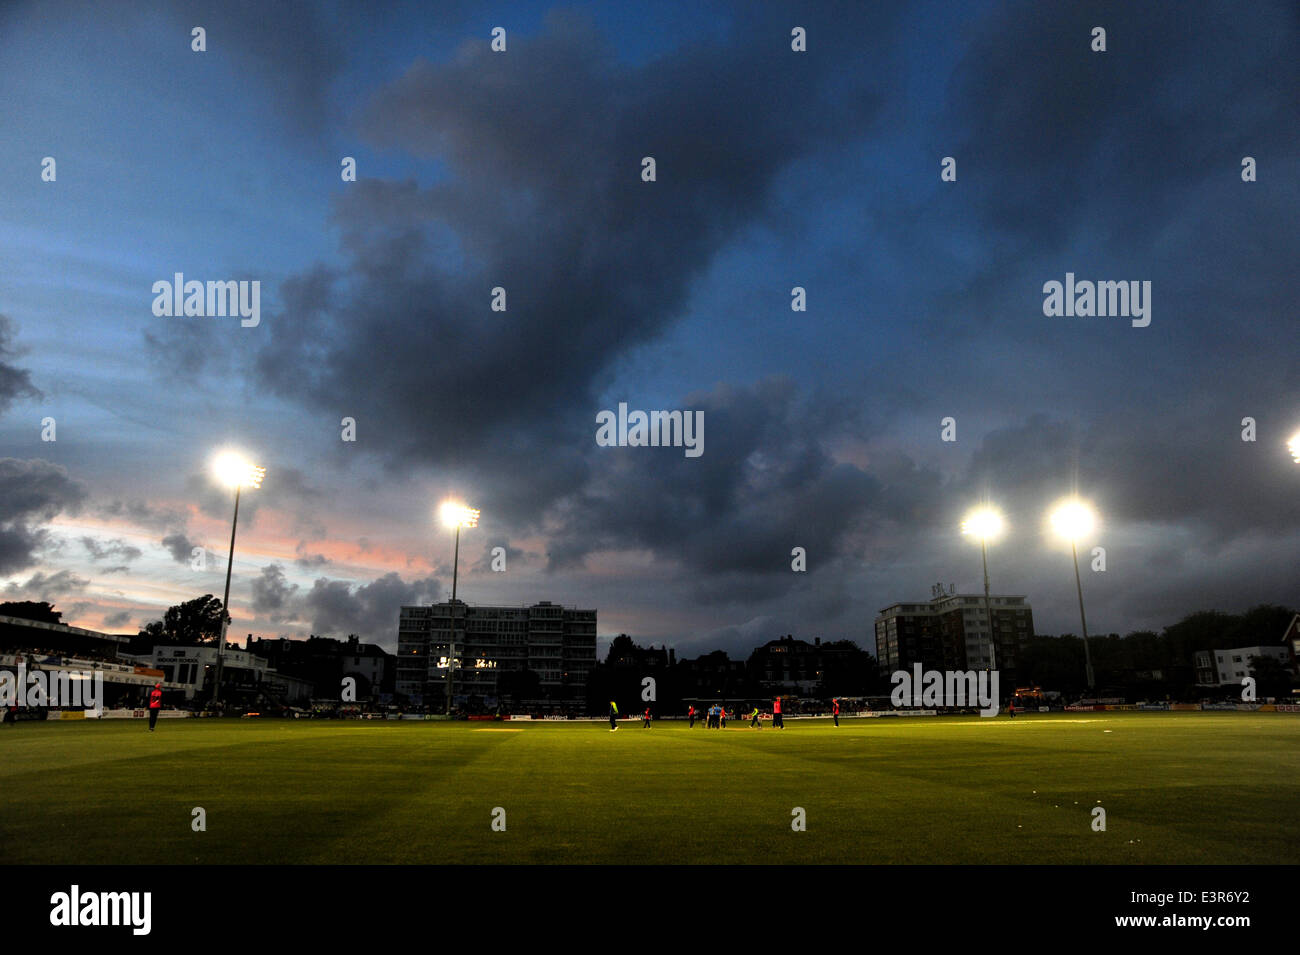 Hove, UK. 27th June, 2014.   Sussex Sharks v Middlesex Panthers T20 Blast match at Hove Sussex Sharks cruise to an easy victory over the Middlesex Panthers under a moody sky and the floodlights at Hove tonight Stock Photo